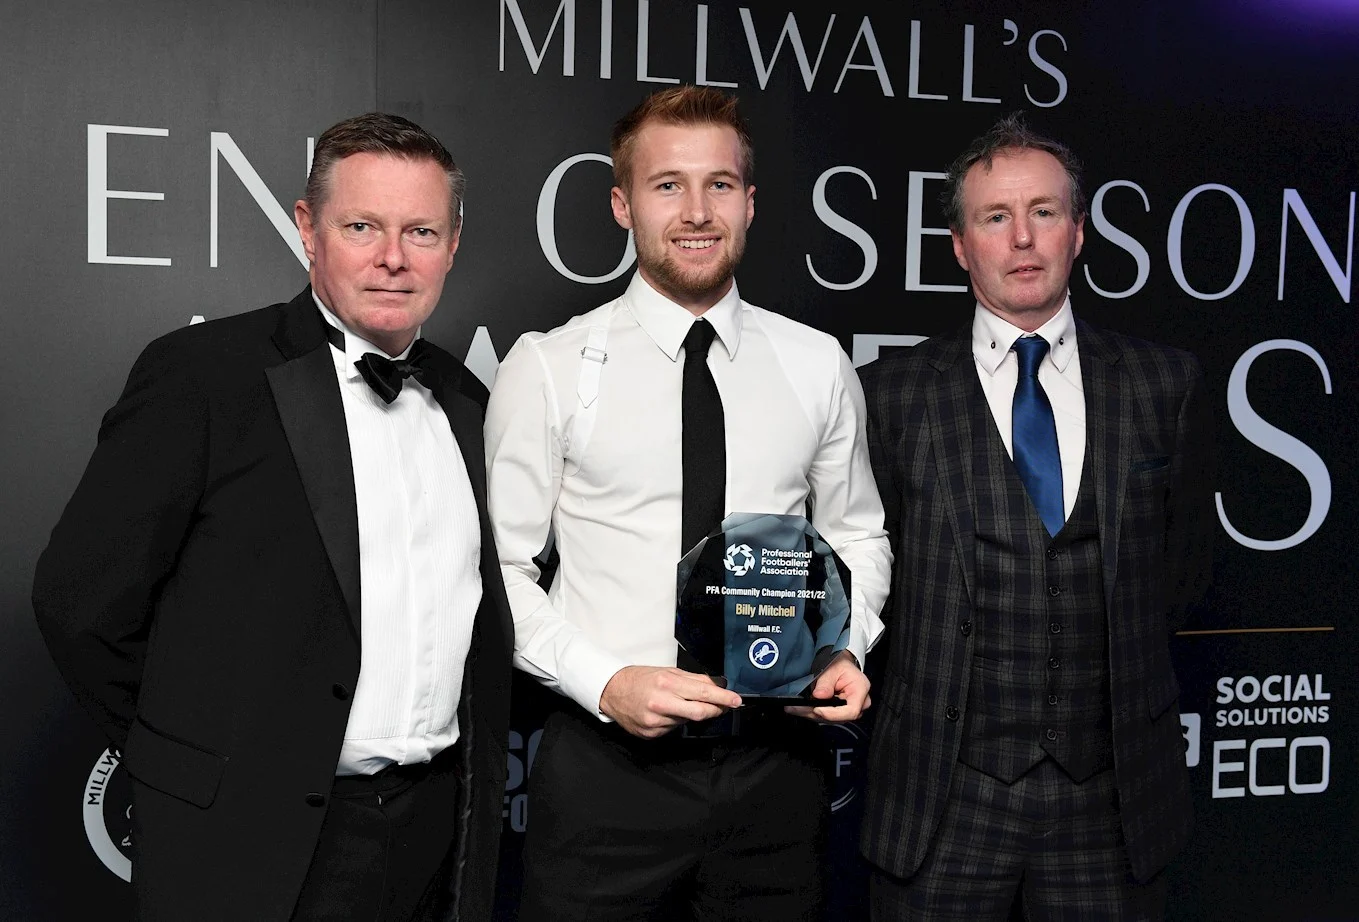 Millwall's End of Season Awards Night takes place at The Den